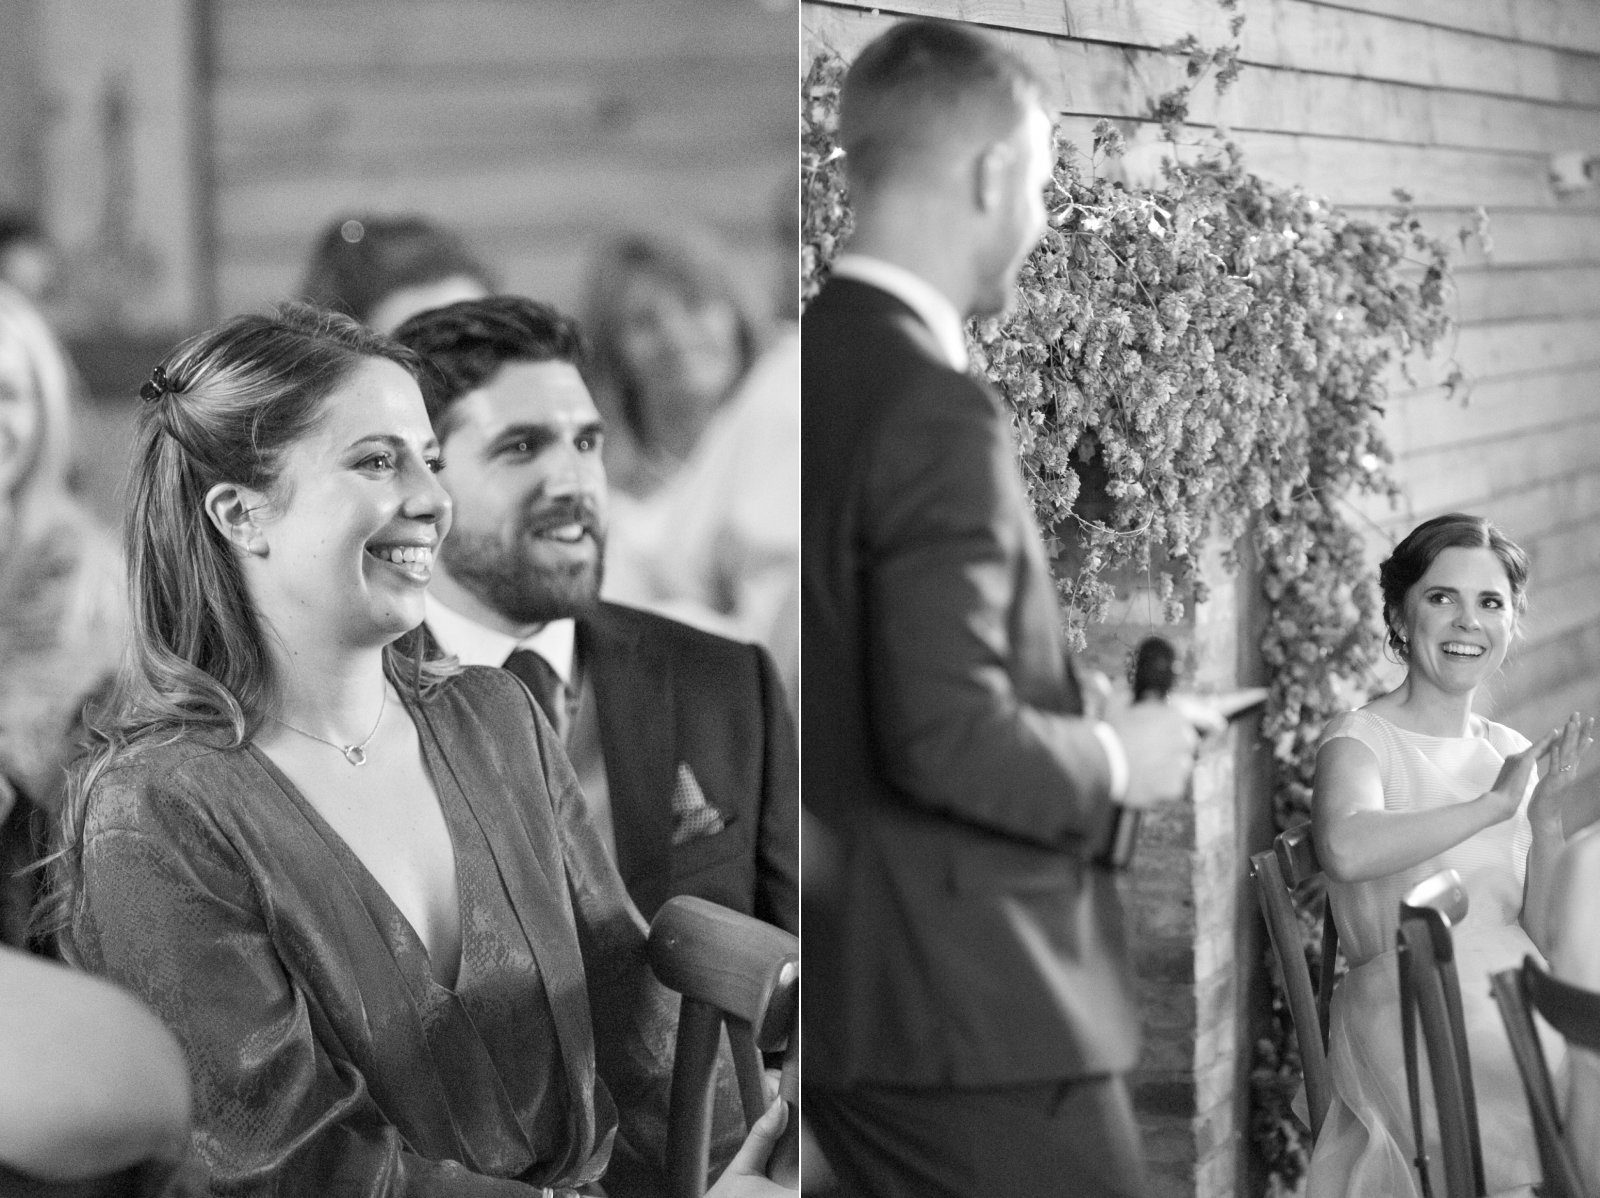 Candid photos of guests listening to wedding speeches at High Billinghurst Farm